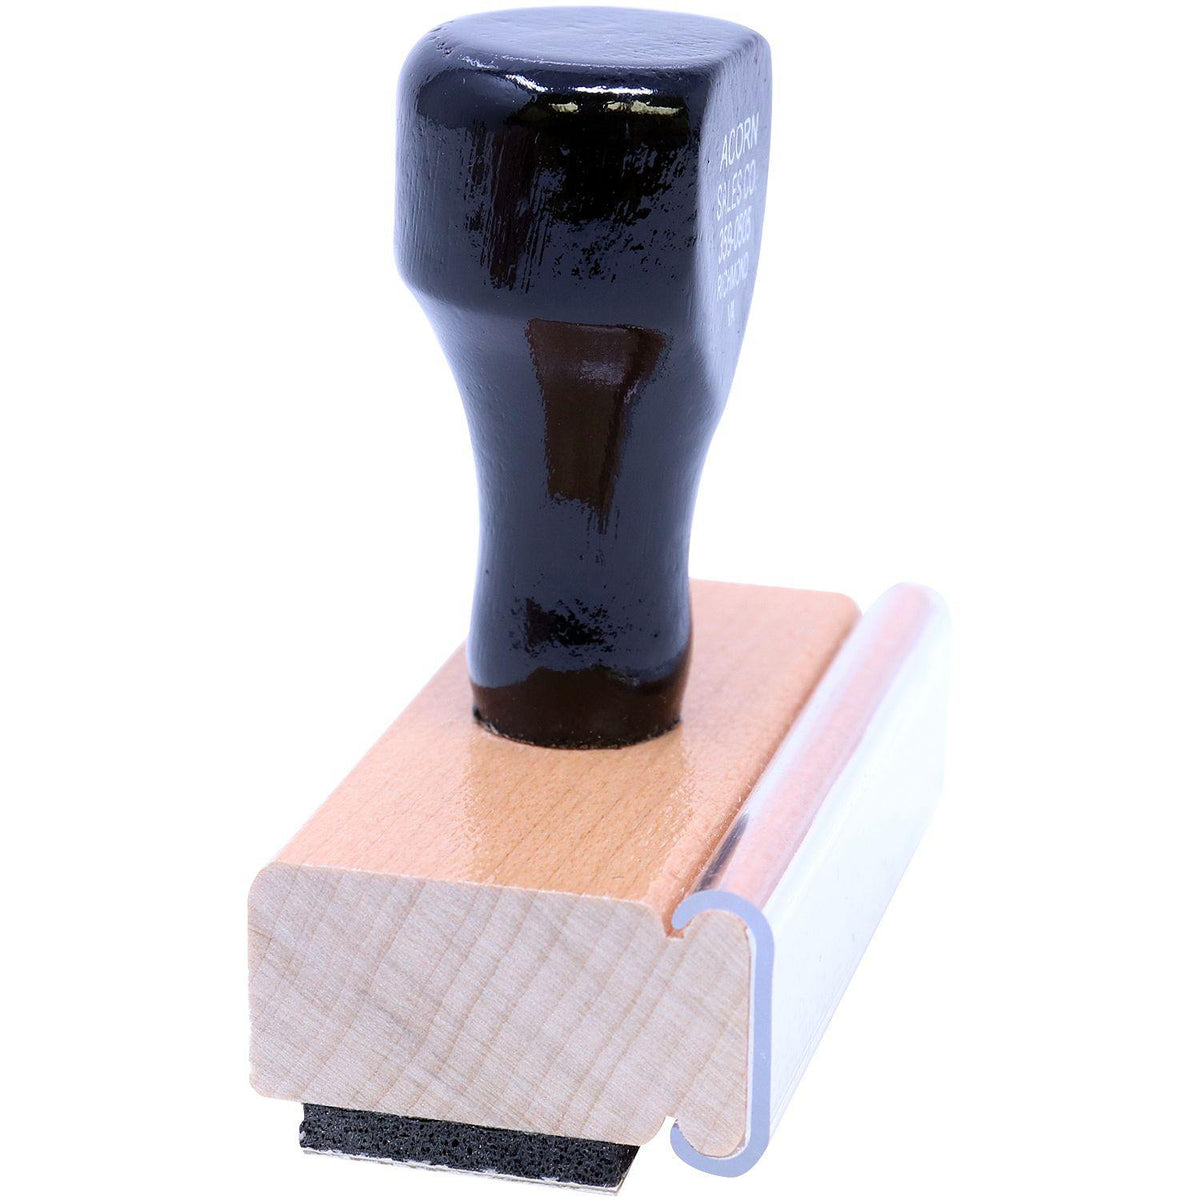 Side View of Large Refused Rubber Stamp at an Angle